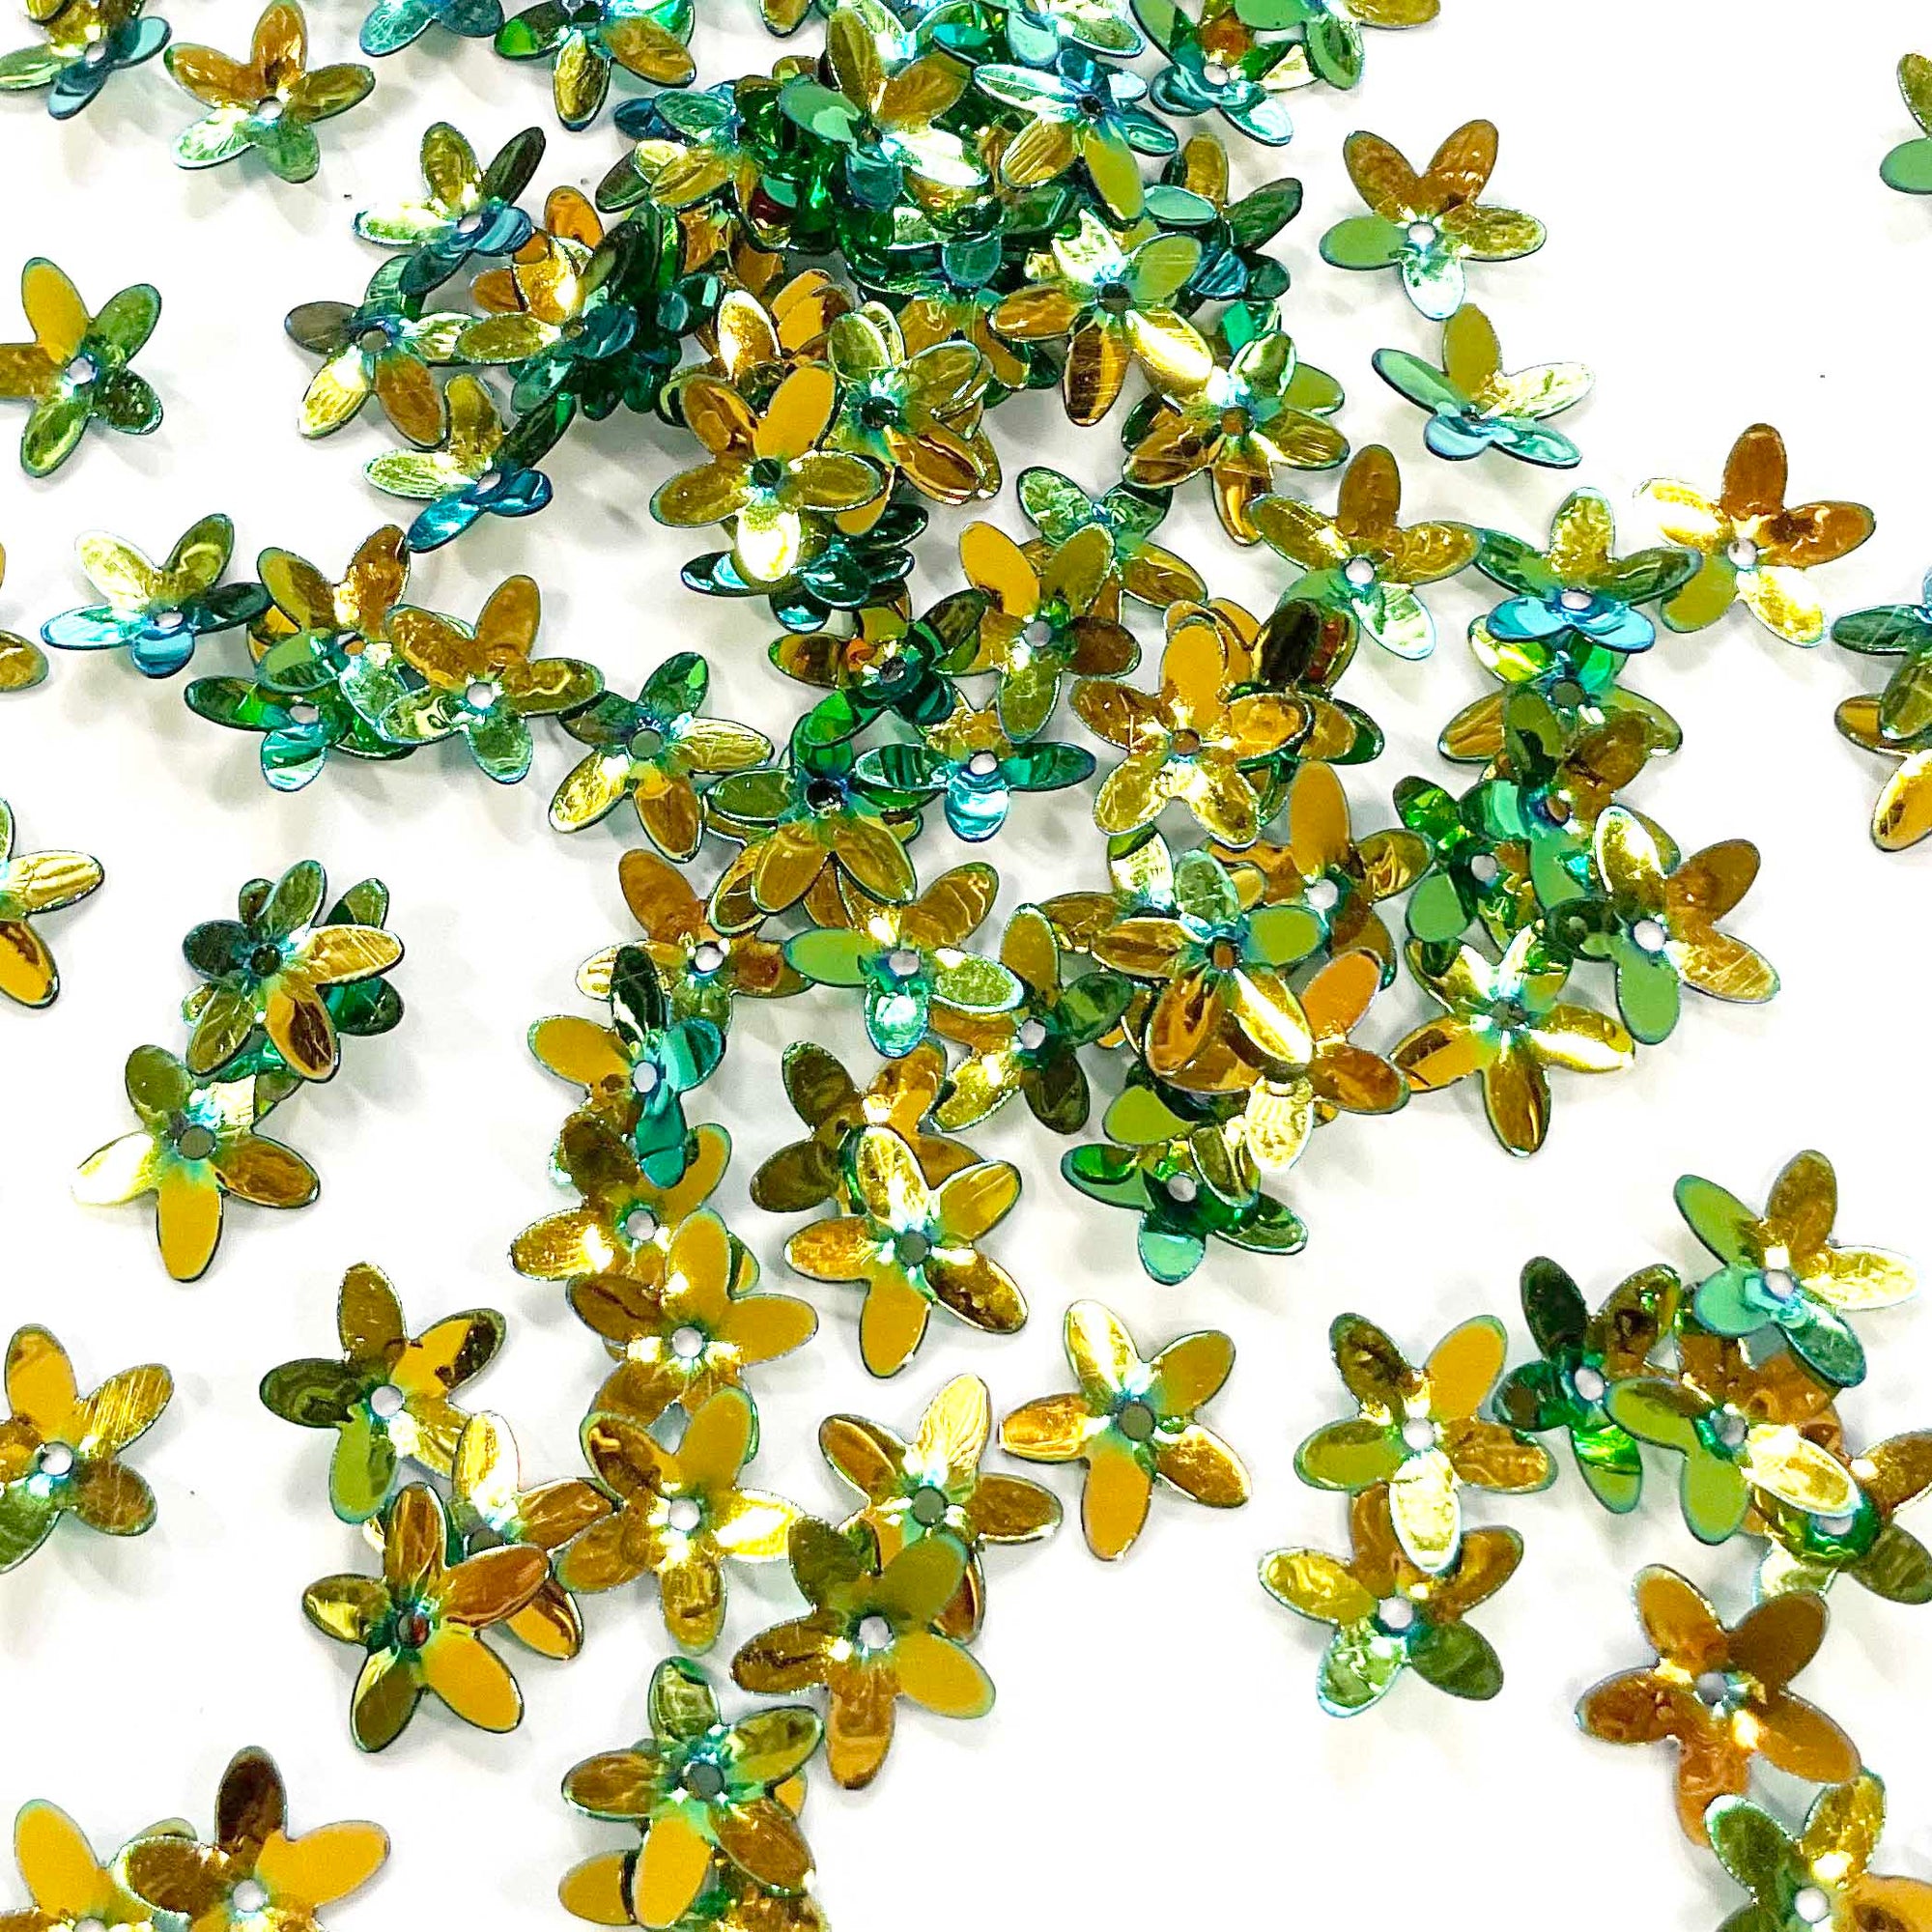 www.colourstreams.com.au Colour Streams Sequins Embellishments Costumes Mardi Gras Dancing Ballet Theatre Shows Drag Queen Bling S98 Green Gold Lights Iridescent Daisy Shape Shiny 10mm